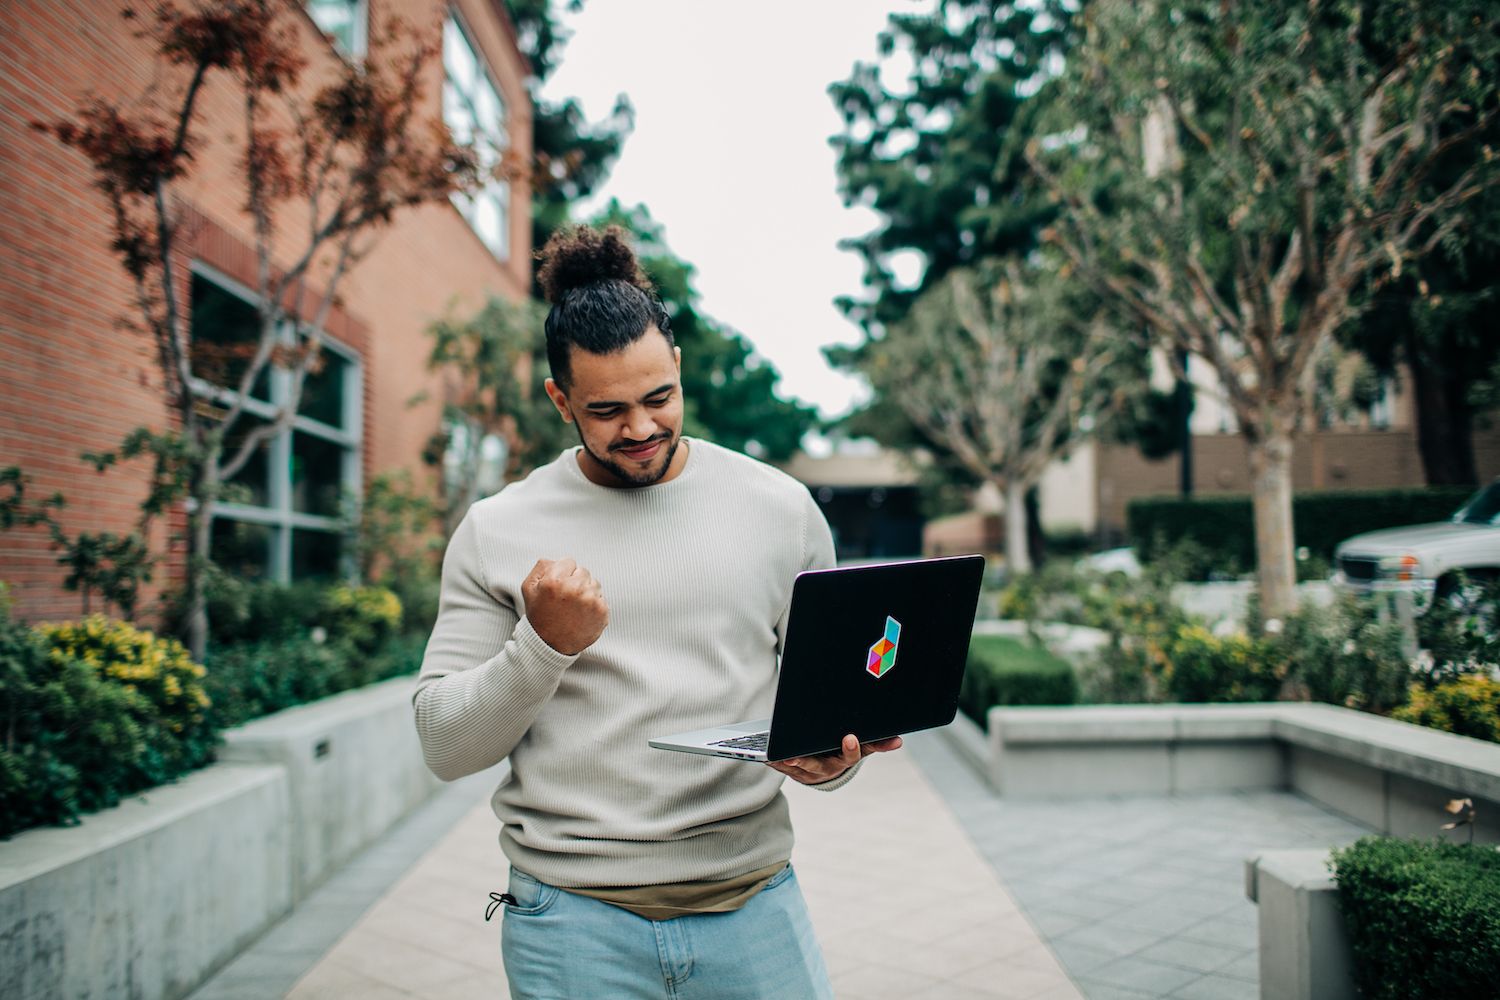 A man in a light sweater and jeans stands outside, triumphantly raising his fist while looking at his laptop with a colorful logo on the back. He appears to be celebrating a success or victory that he has just discovered or achieved online.